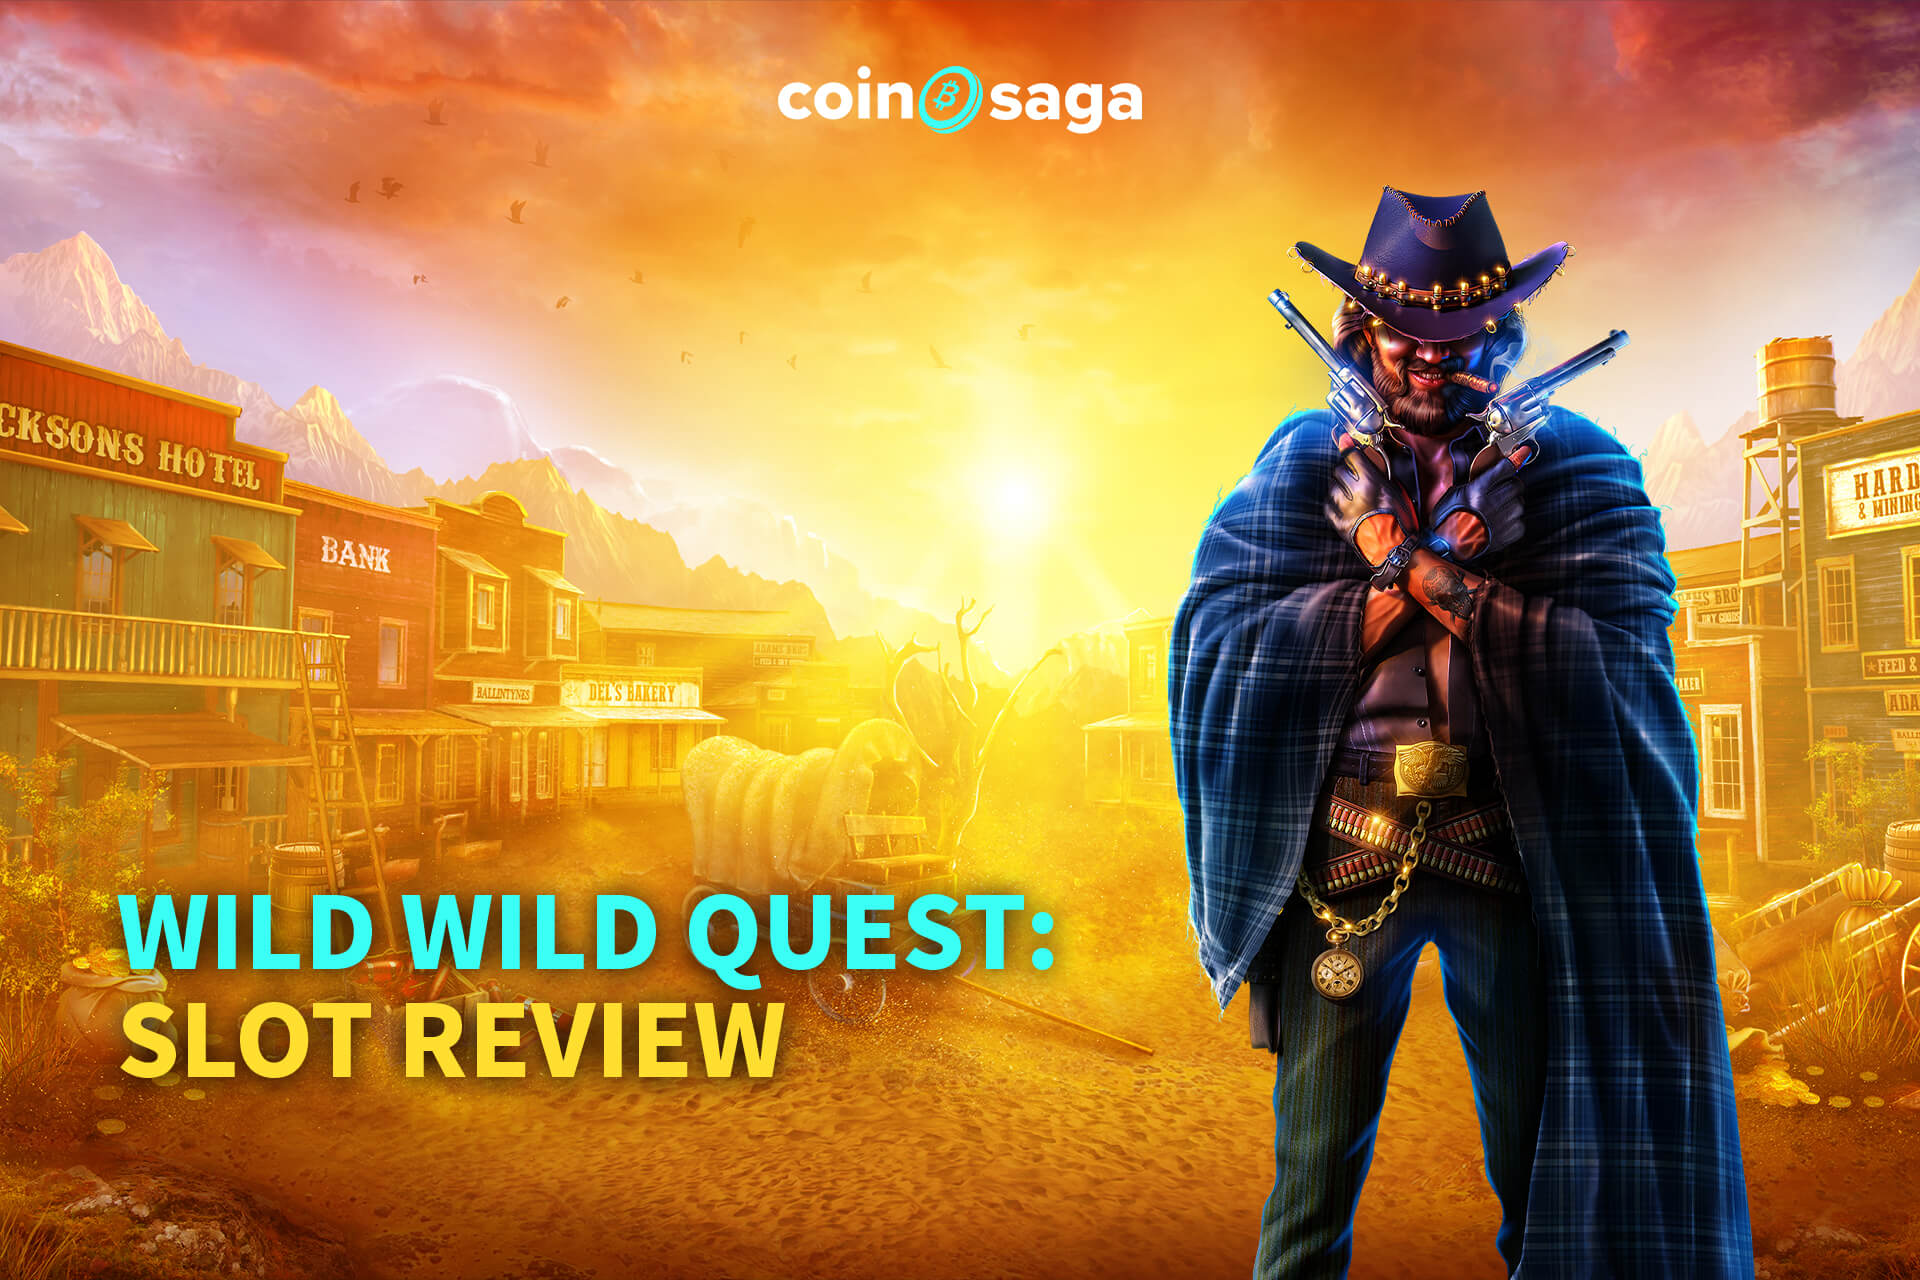 The Wild Wild Quest Slot Review